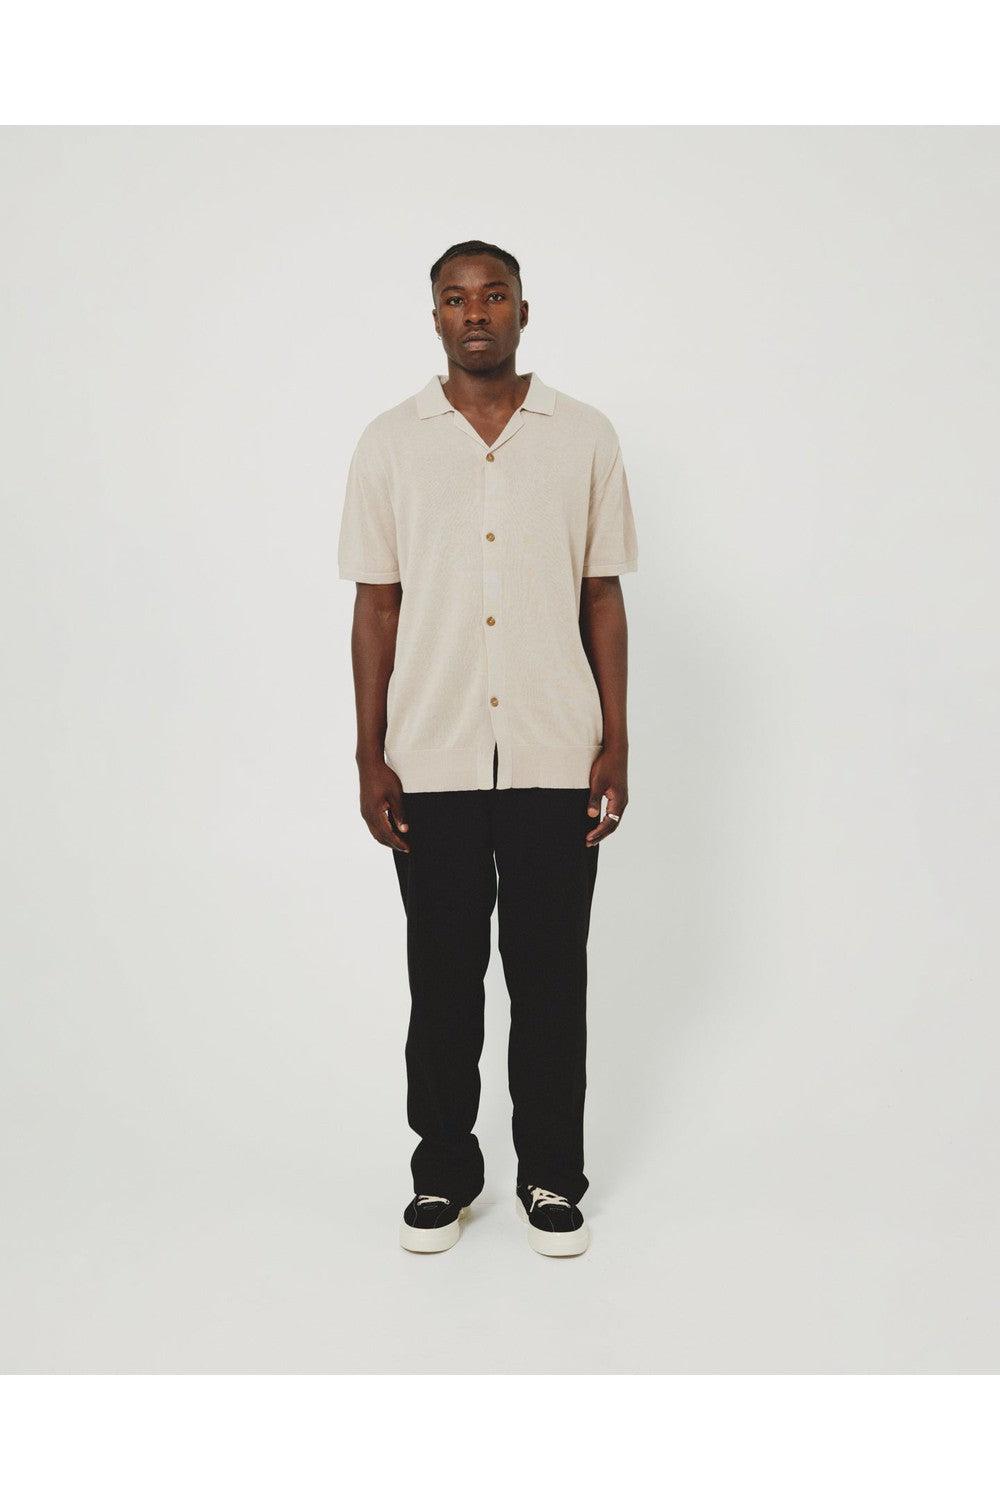 CAMPER KNIT SS SHIRT - BEIGE | Kore Studios | Mad About The Boy